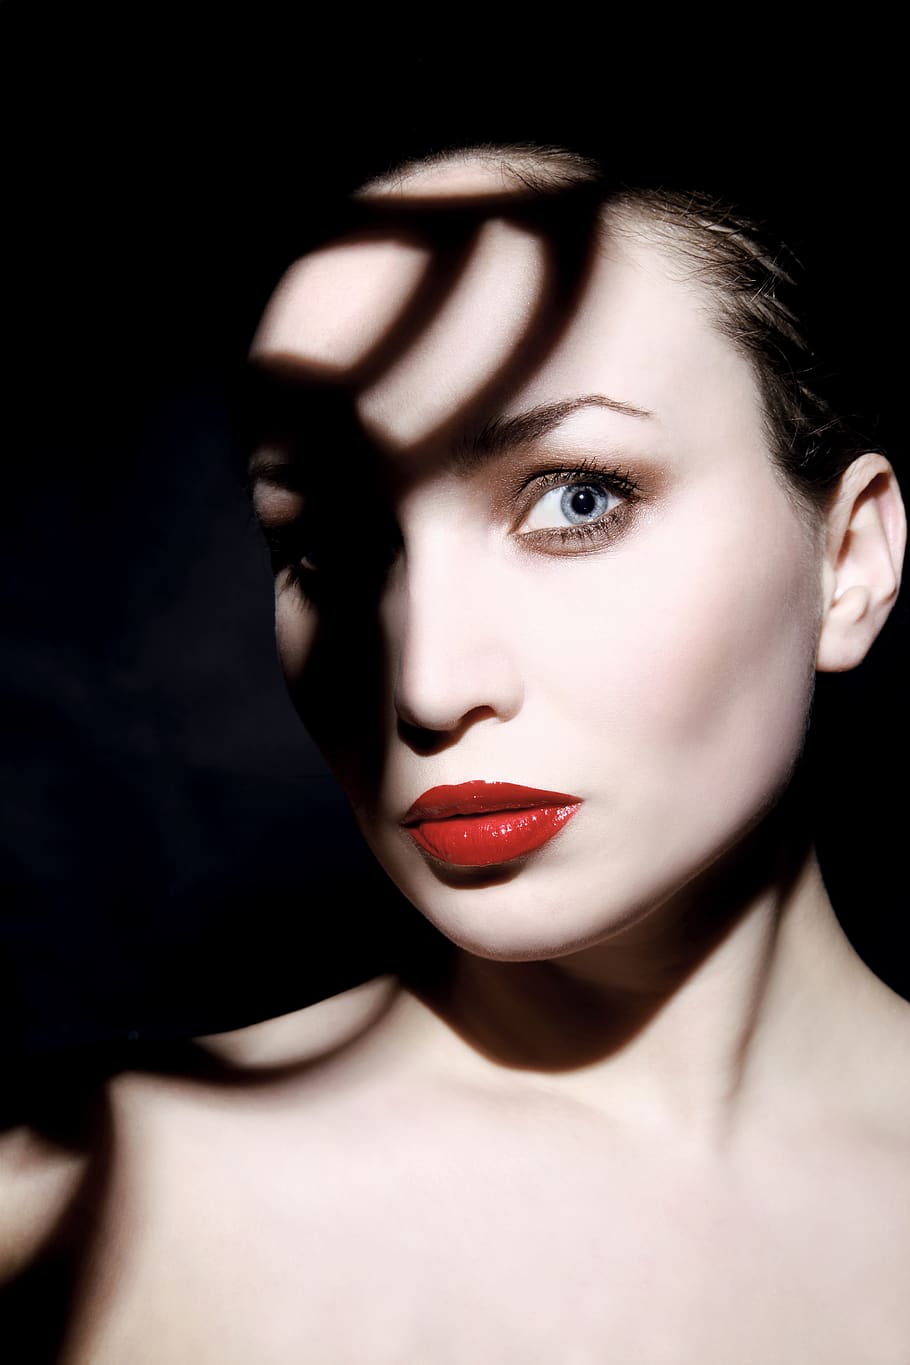 attractive, beautiful, woman, female, red lips, red, lips, makeup, make up, model